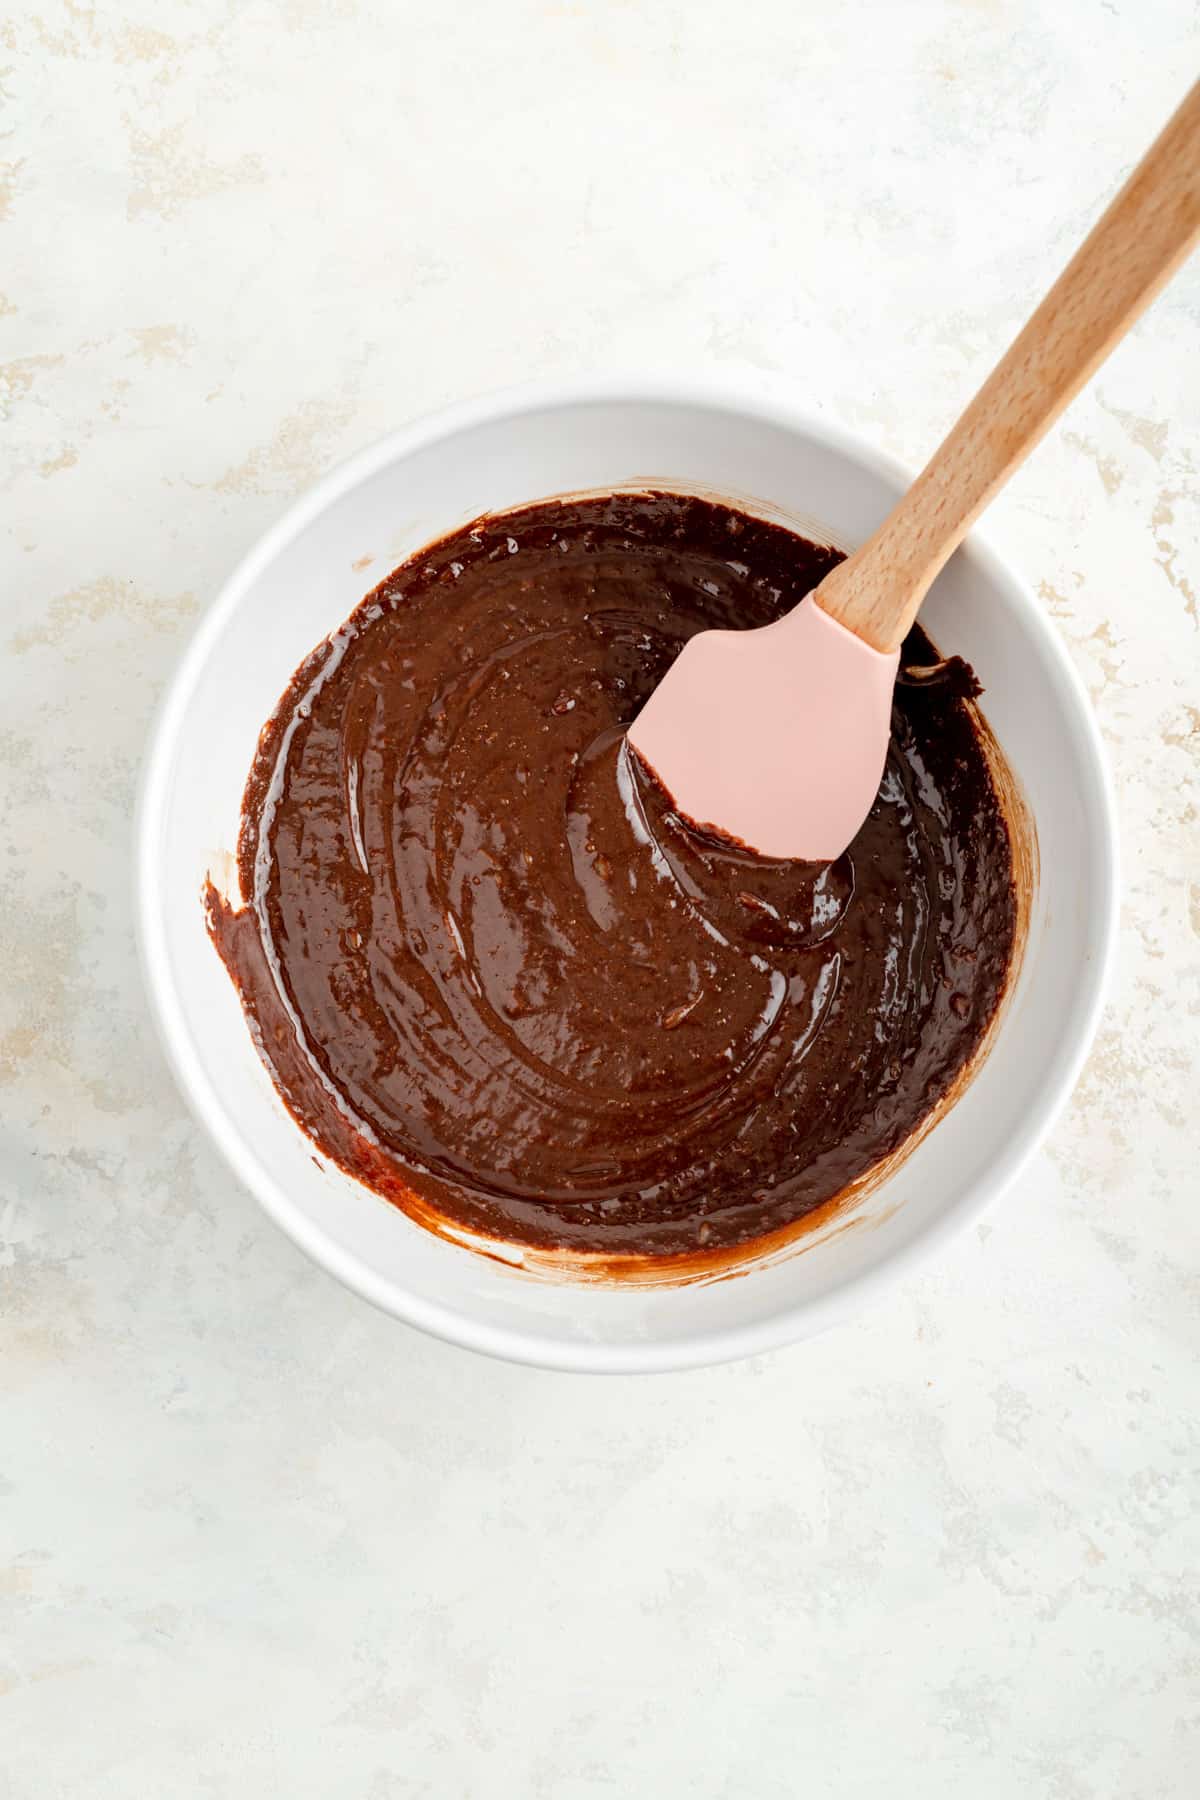 Final brownie batter in white mixing bowl with pink and would spatula.